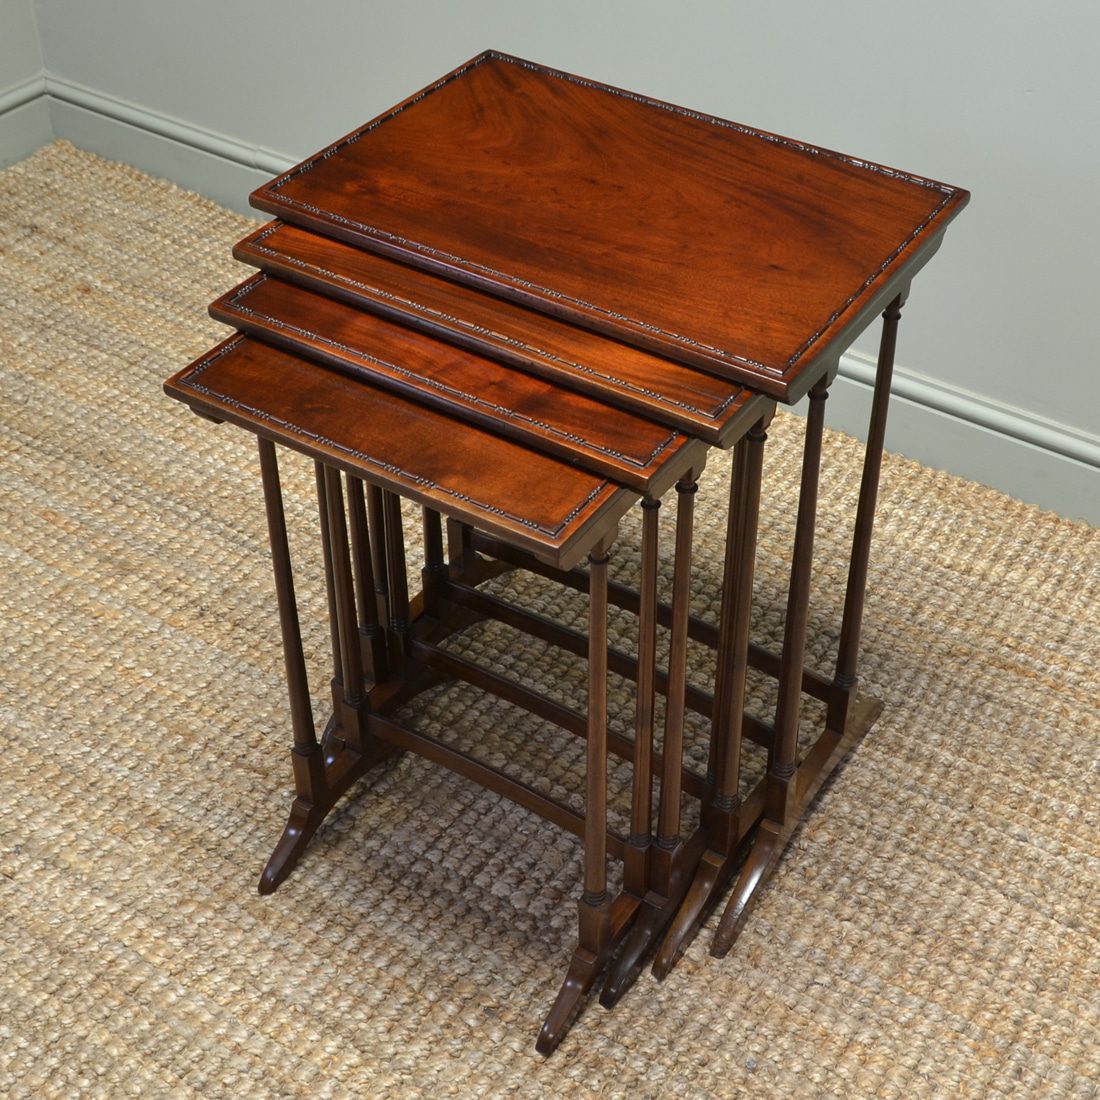 Spectacular Edwardian Mahogany Antique Nest of Four Tables by S&H Jewell of London